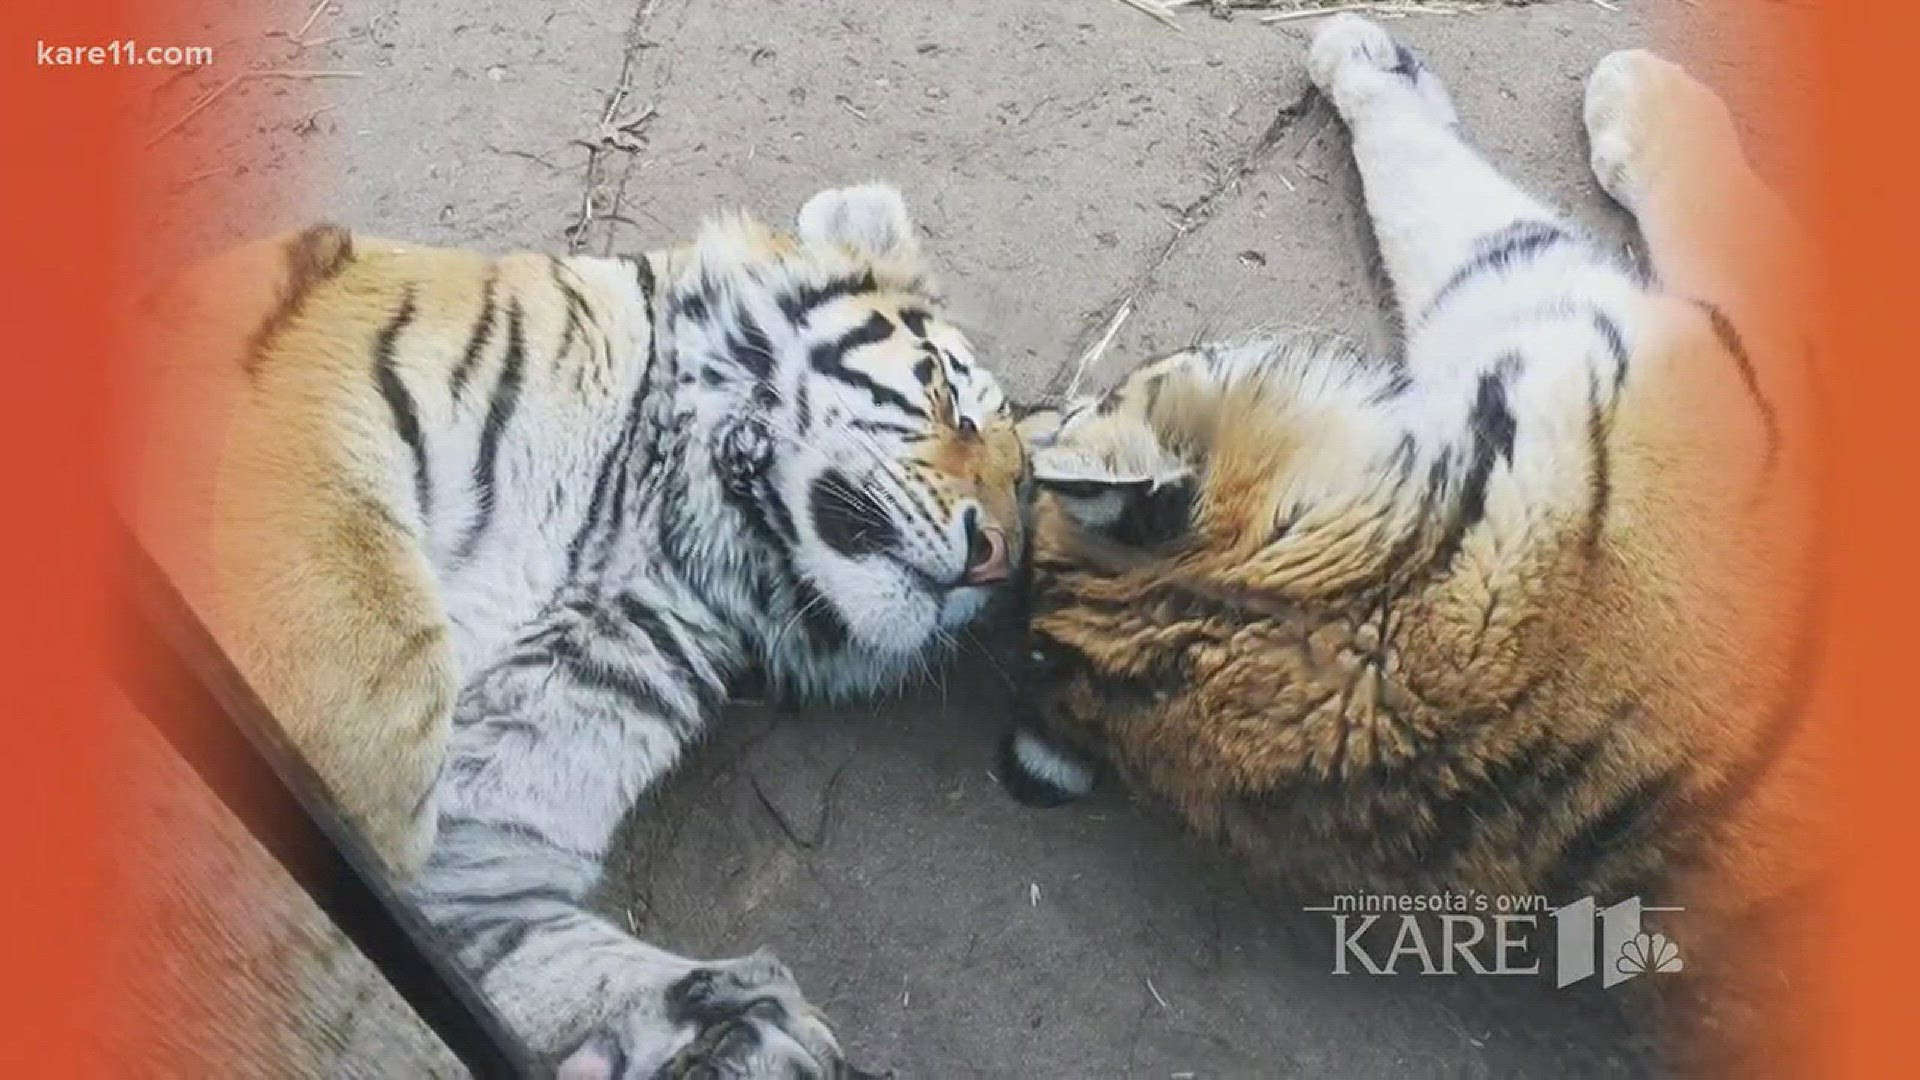 Two new female Amur tigers recently arrived at the zoo, bringing the total of endangered tigers there to five. http://kare11.tv/2pgXnxc